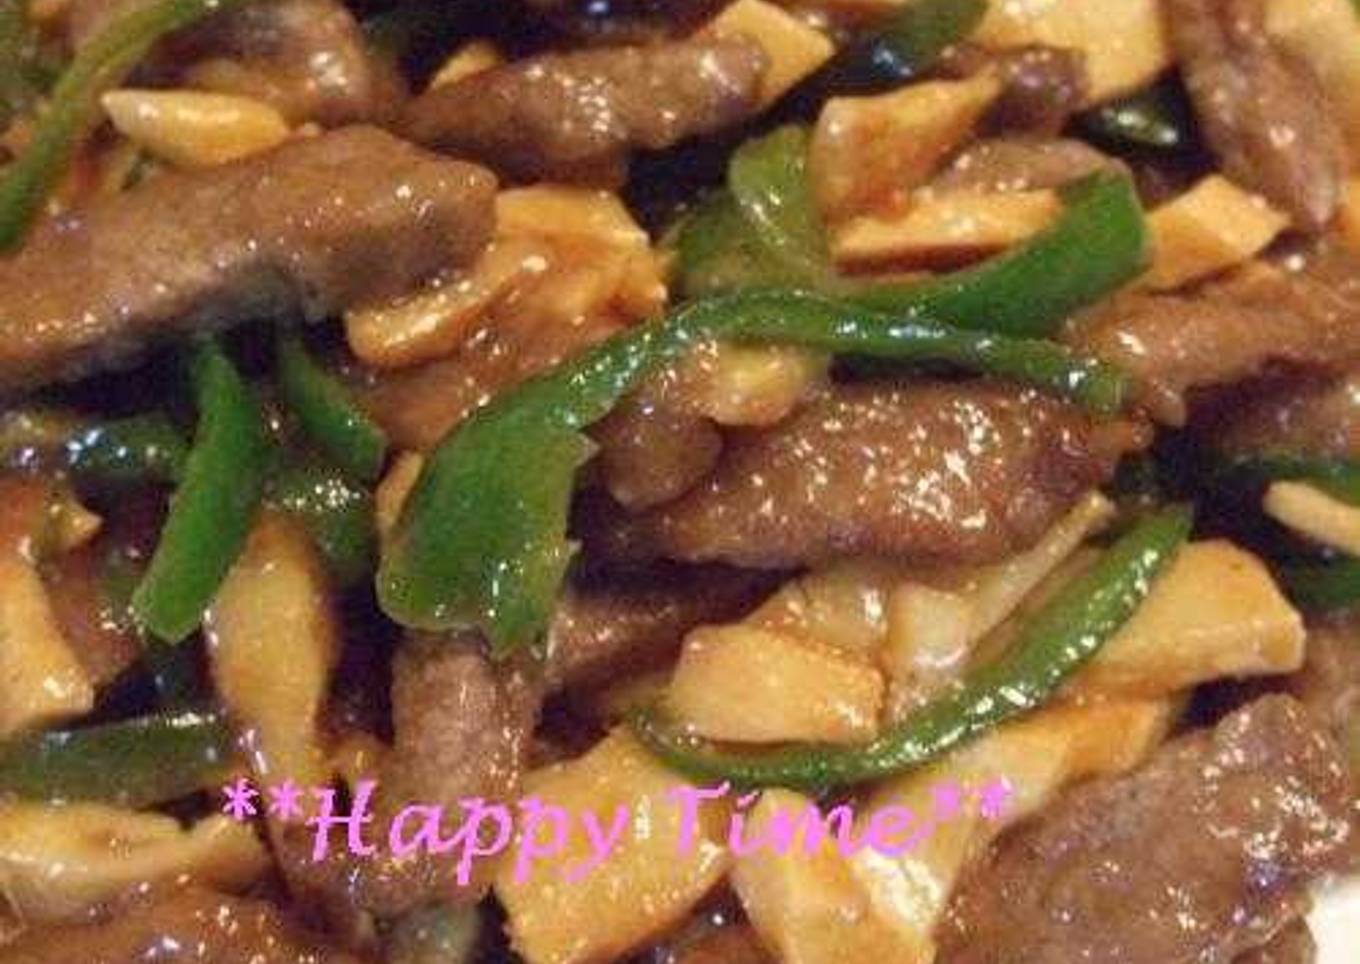 My Kids Rave About This Chinjao Rosu (Stir Fried Beef and Peppers with Oyster Sauce)